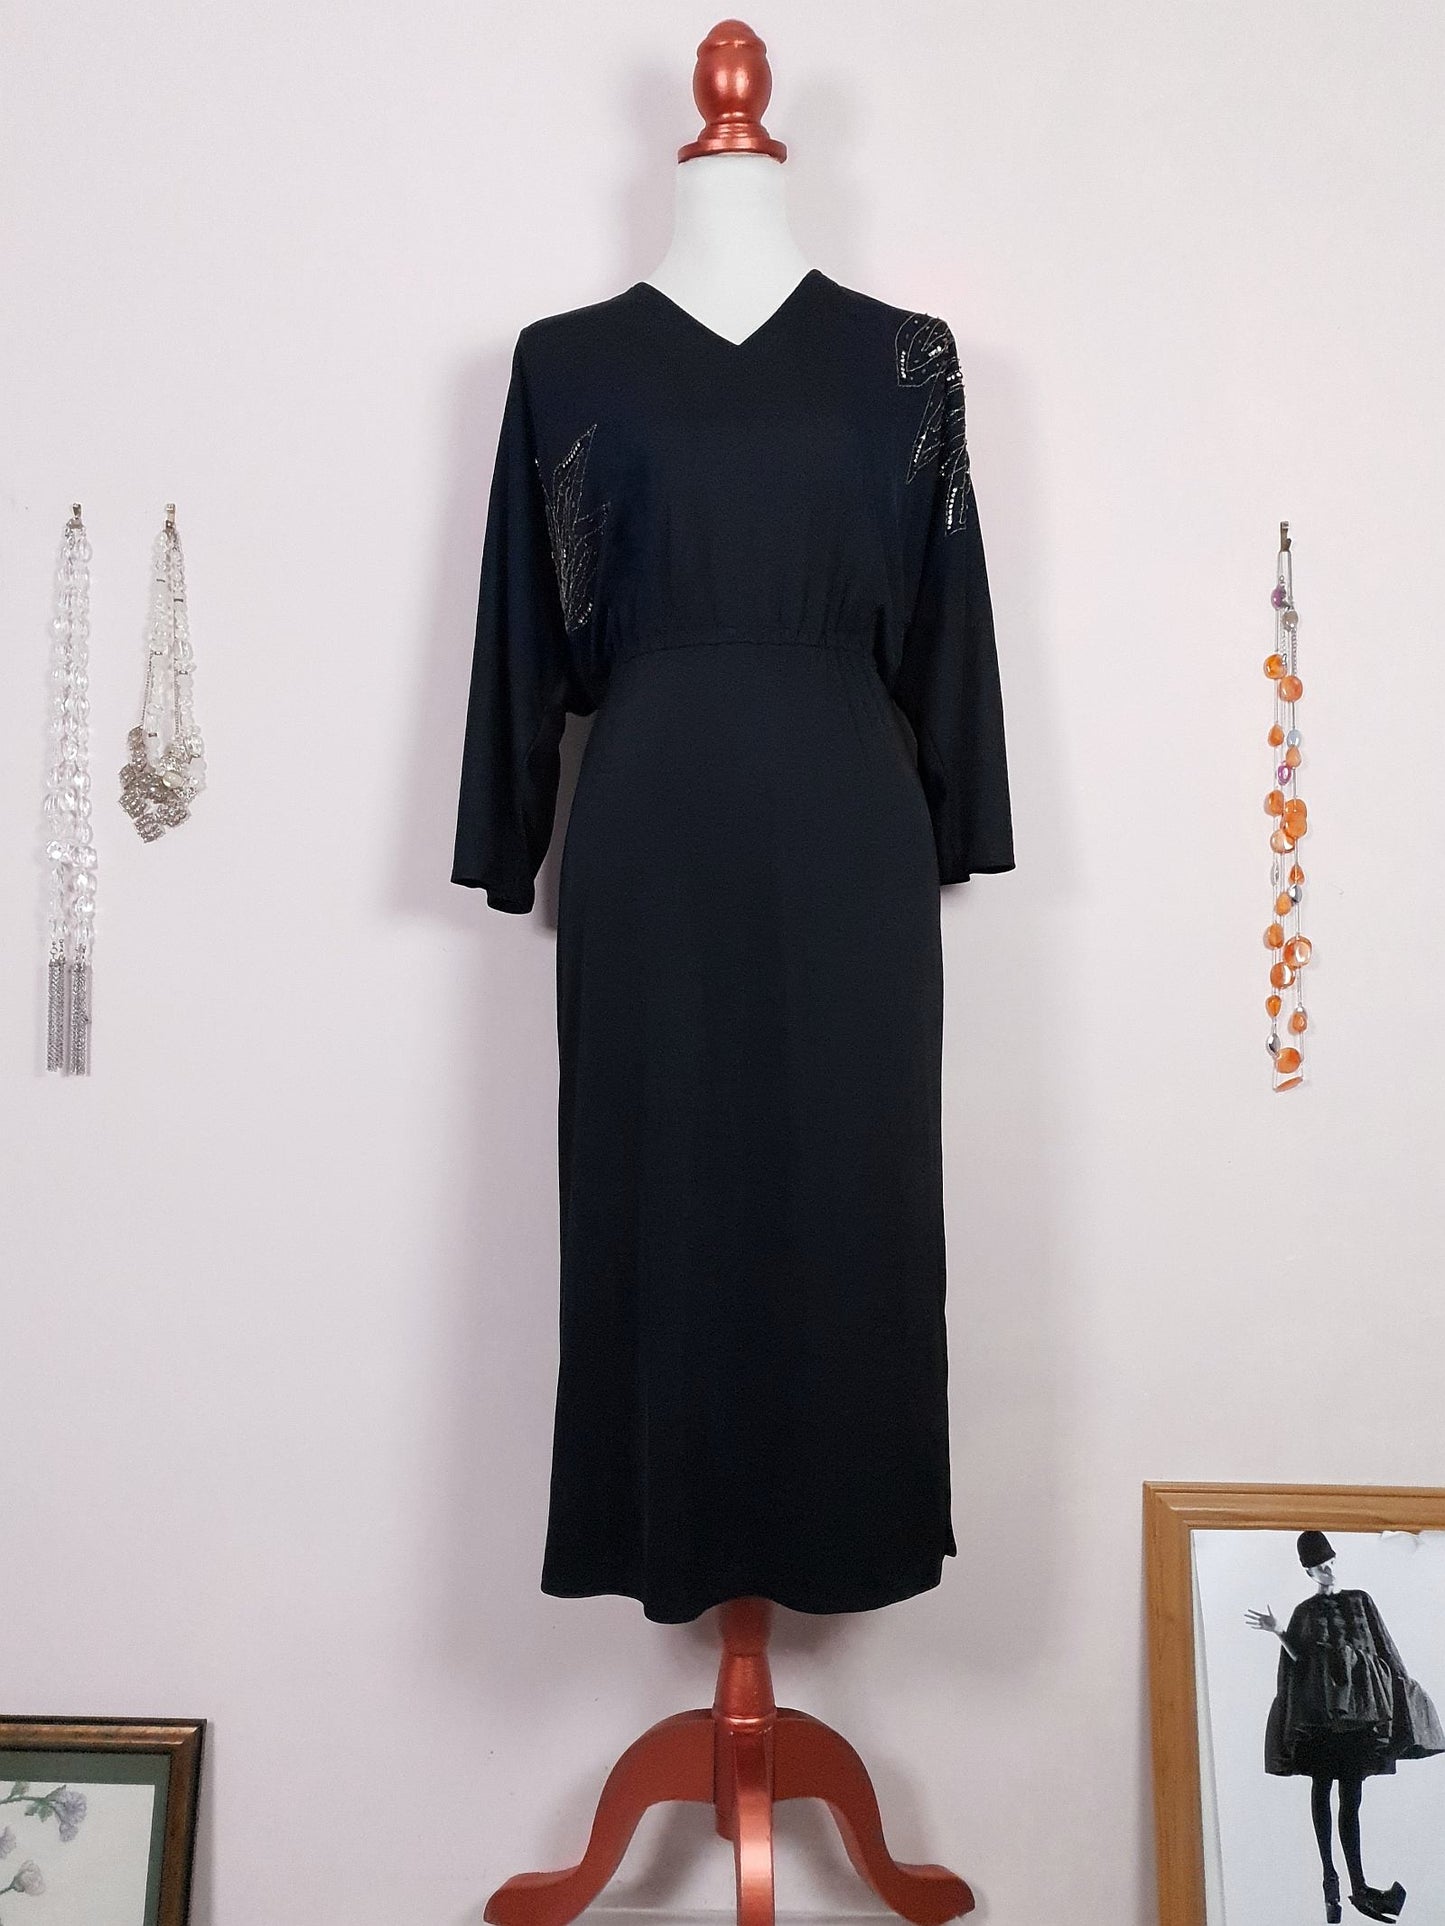 Chic Pre-Loved 1970s Bead and Sequin Black Dress - Size 8/10